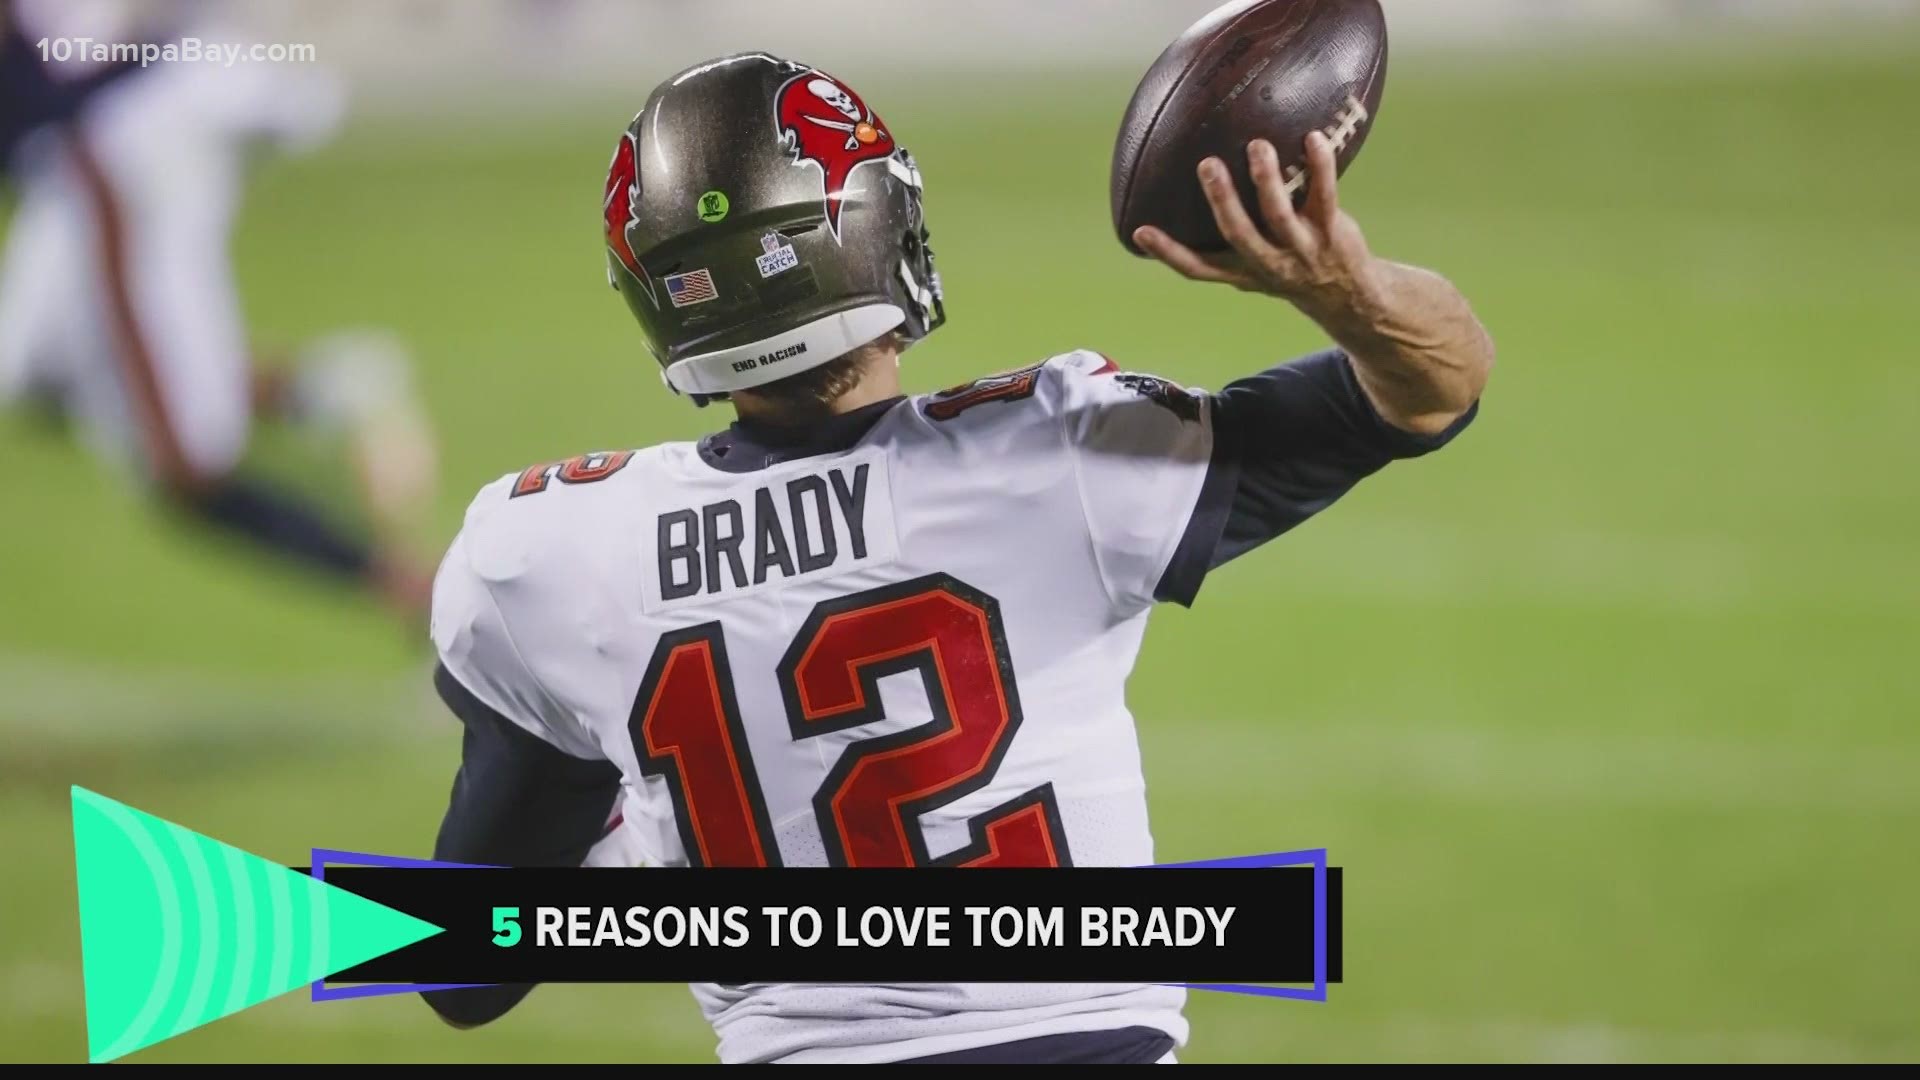 The 10 Tampa Bay team explains why Tom Brady is often dubbed the "GOAT" or the "greatest of all time."